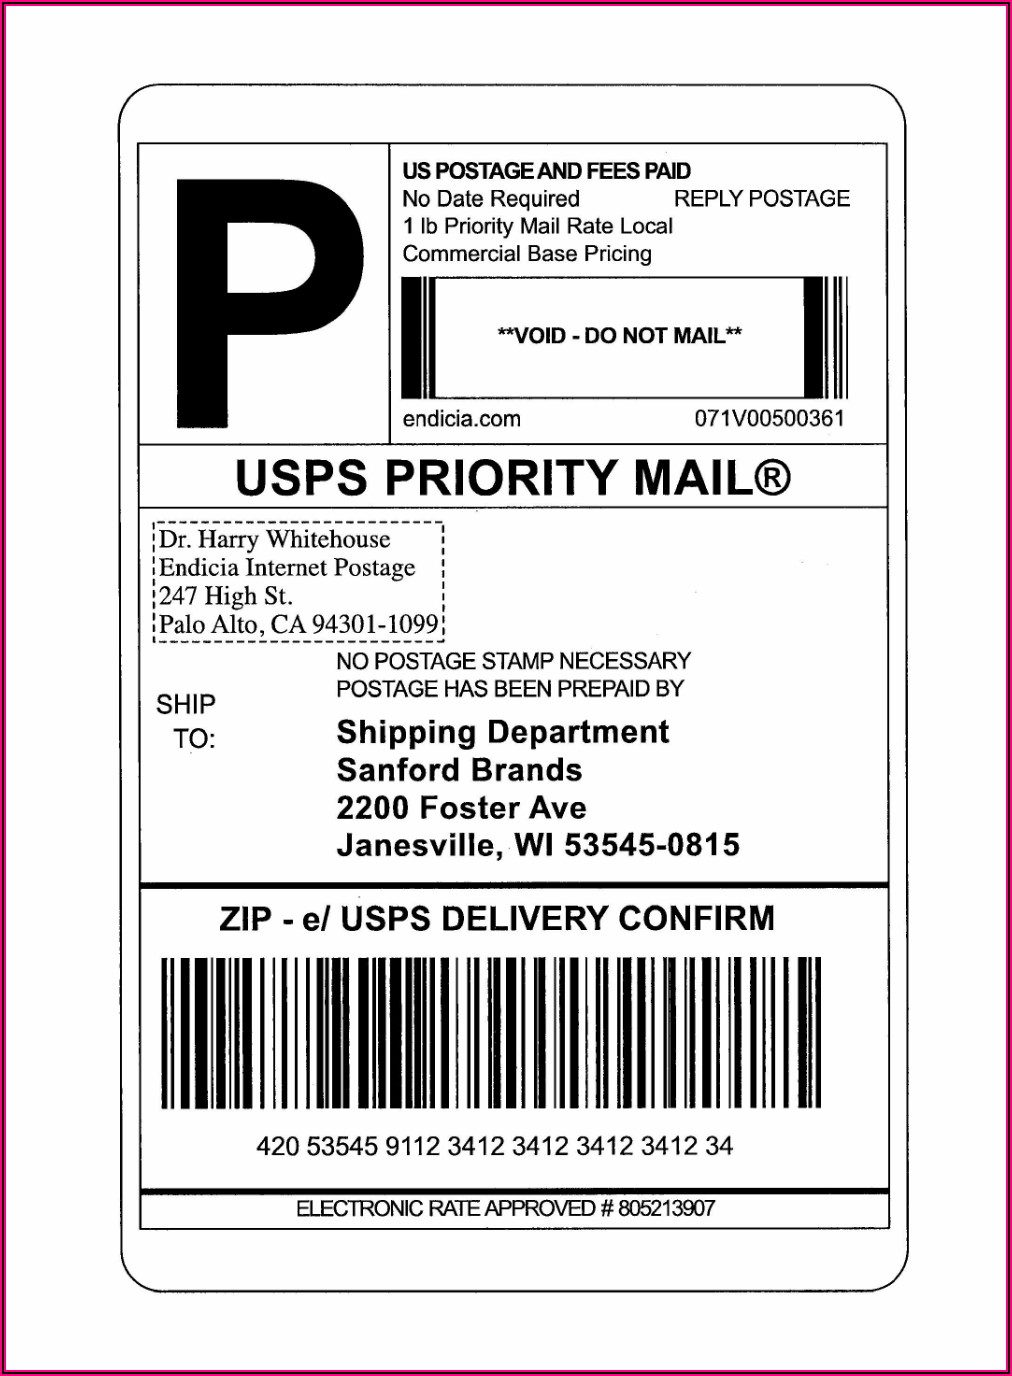 Free Shipping Label Template For Word